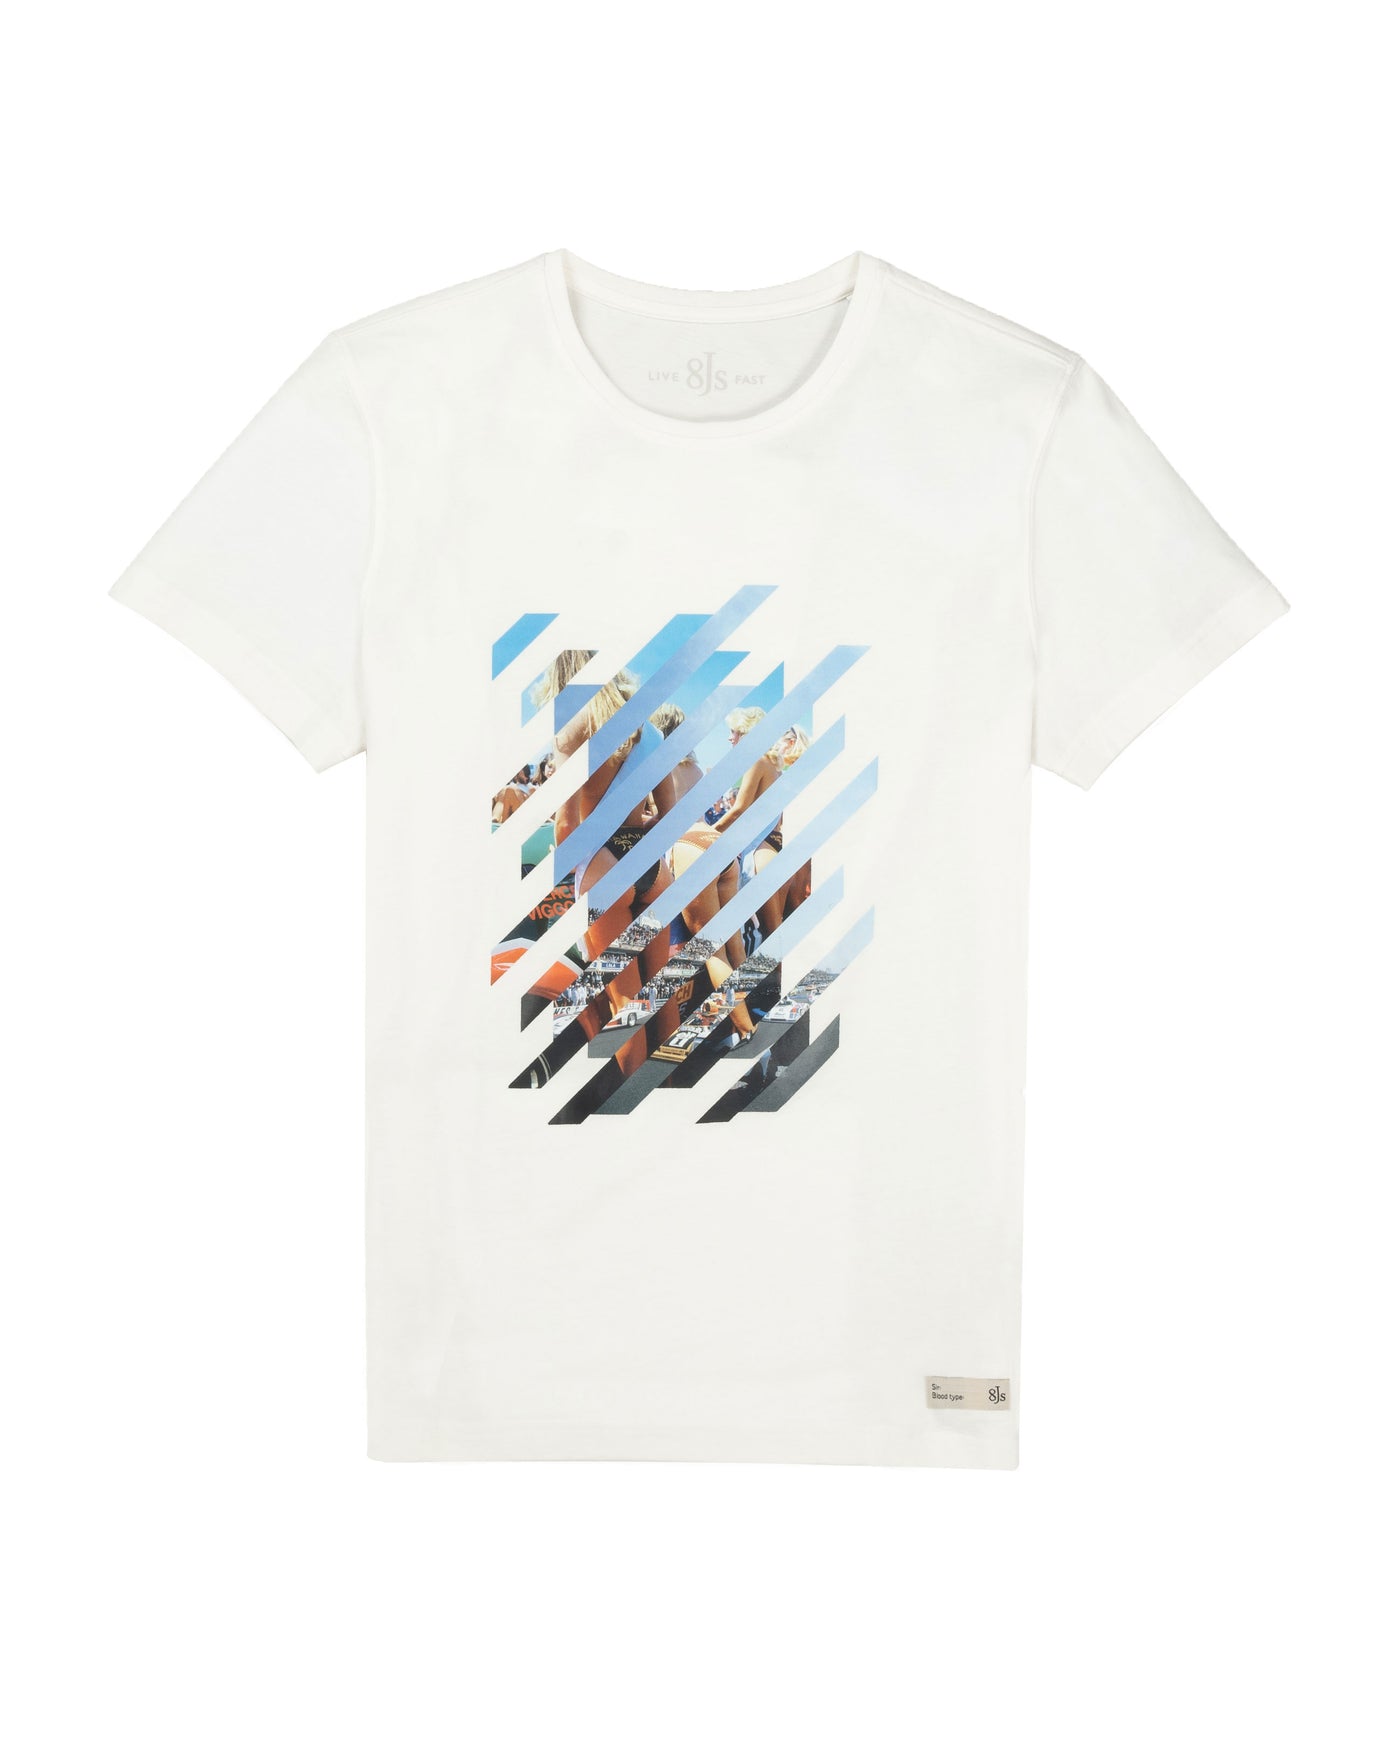 TS86. OFF-WHITE T-SHIRT DIVIDED - 8JS